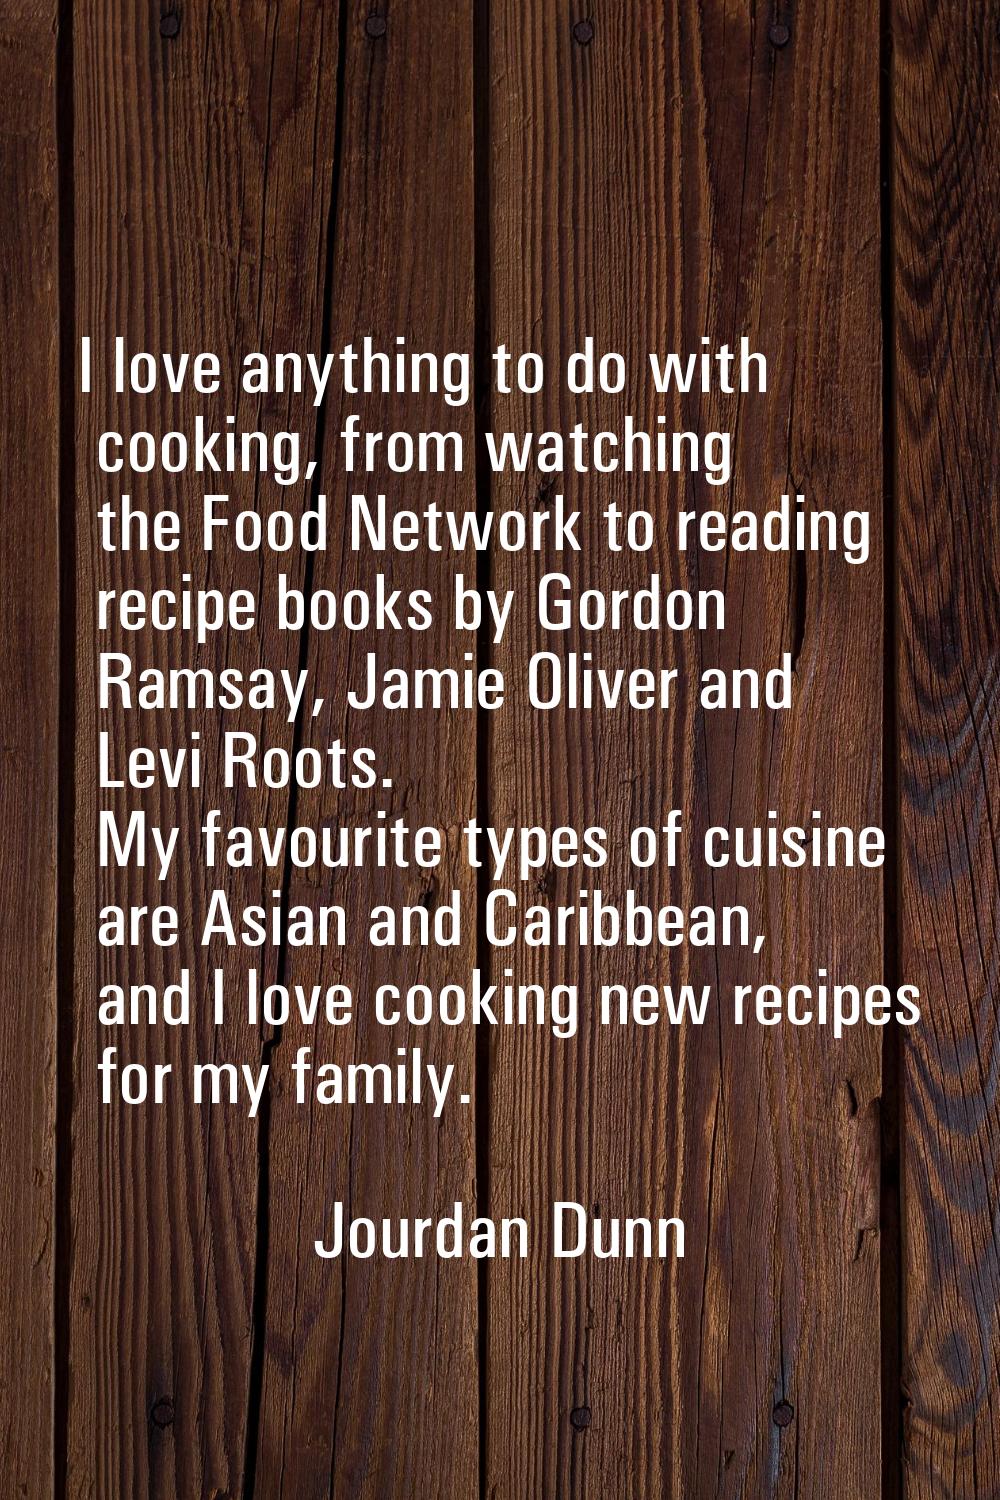 I love anything to do with cooking, from watching the Food Network to reading recipe books by Gordo